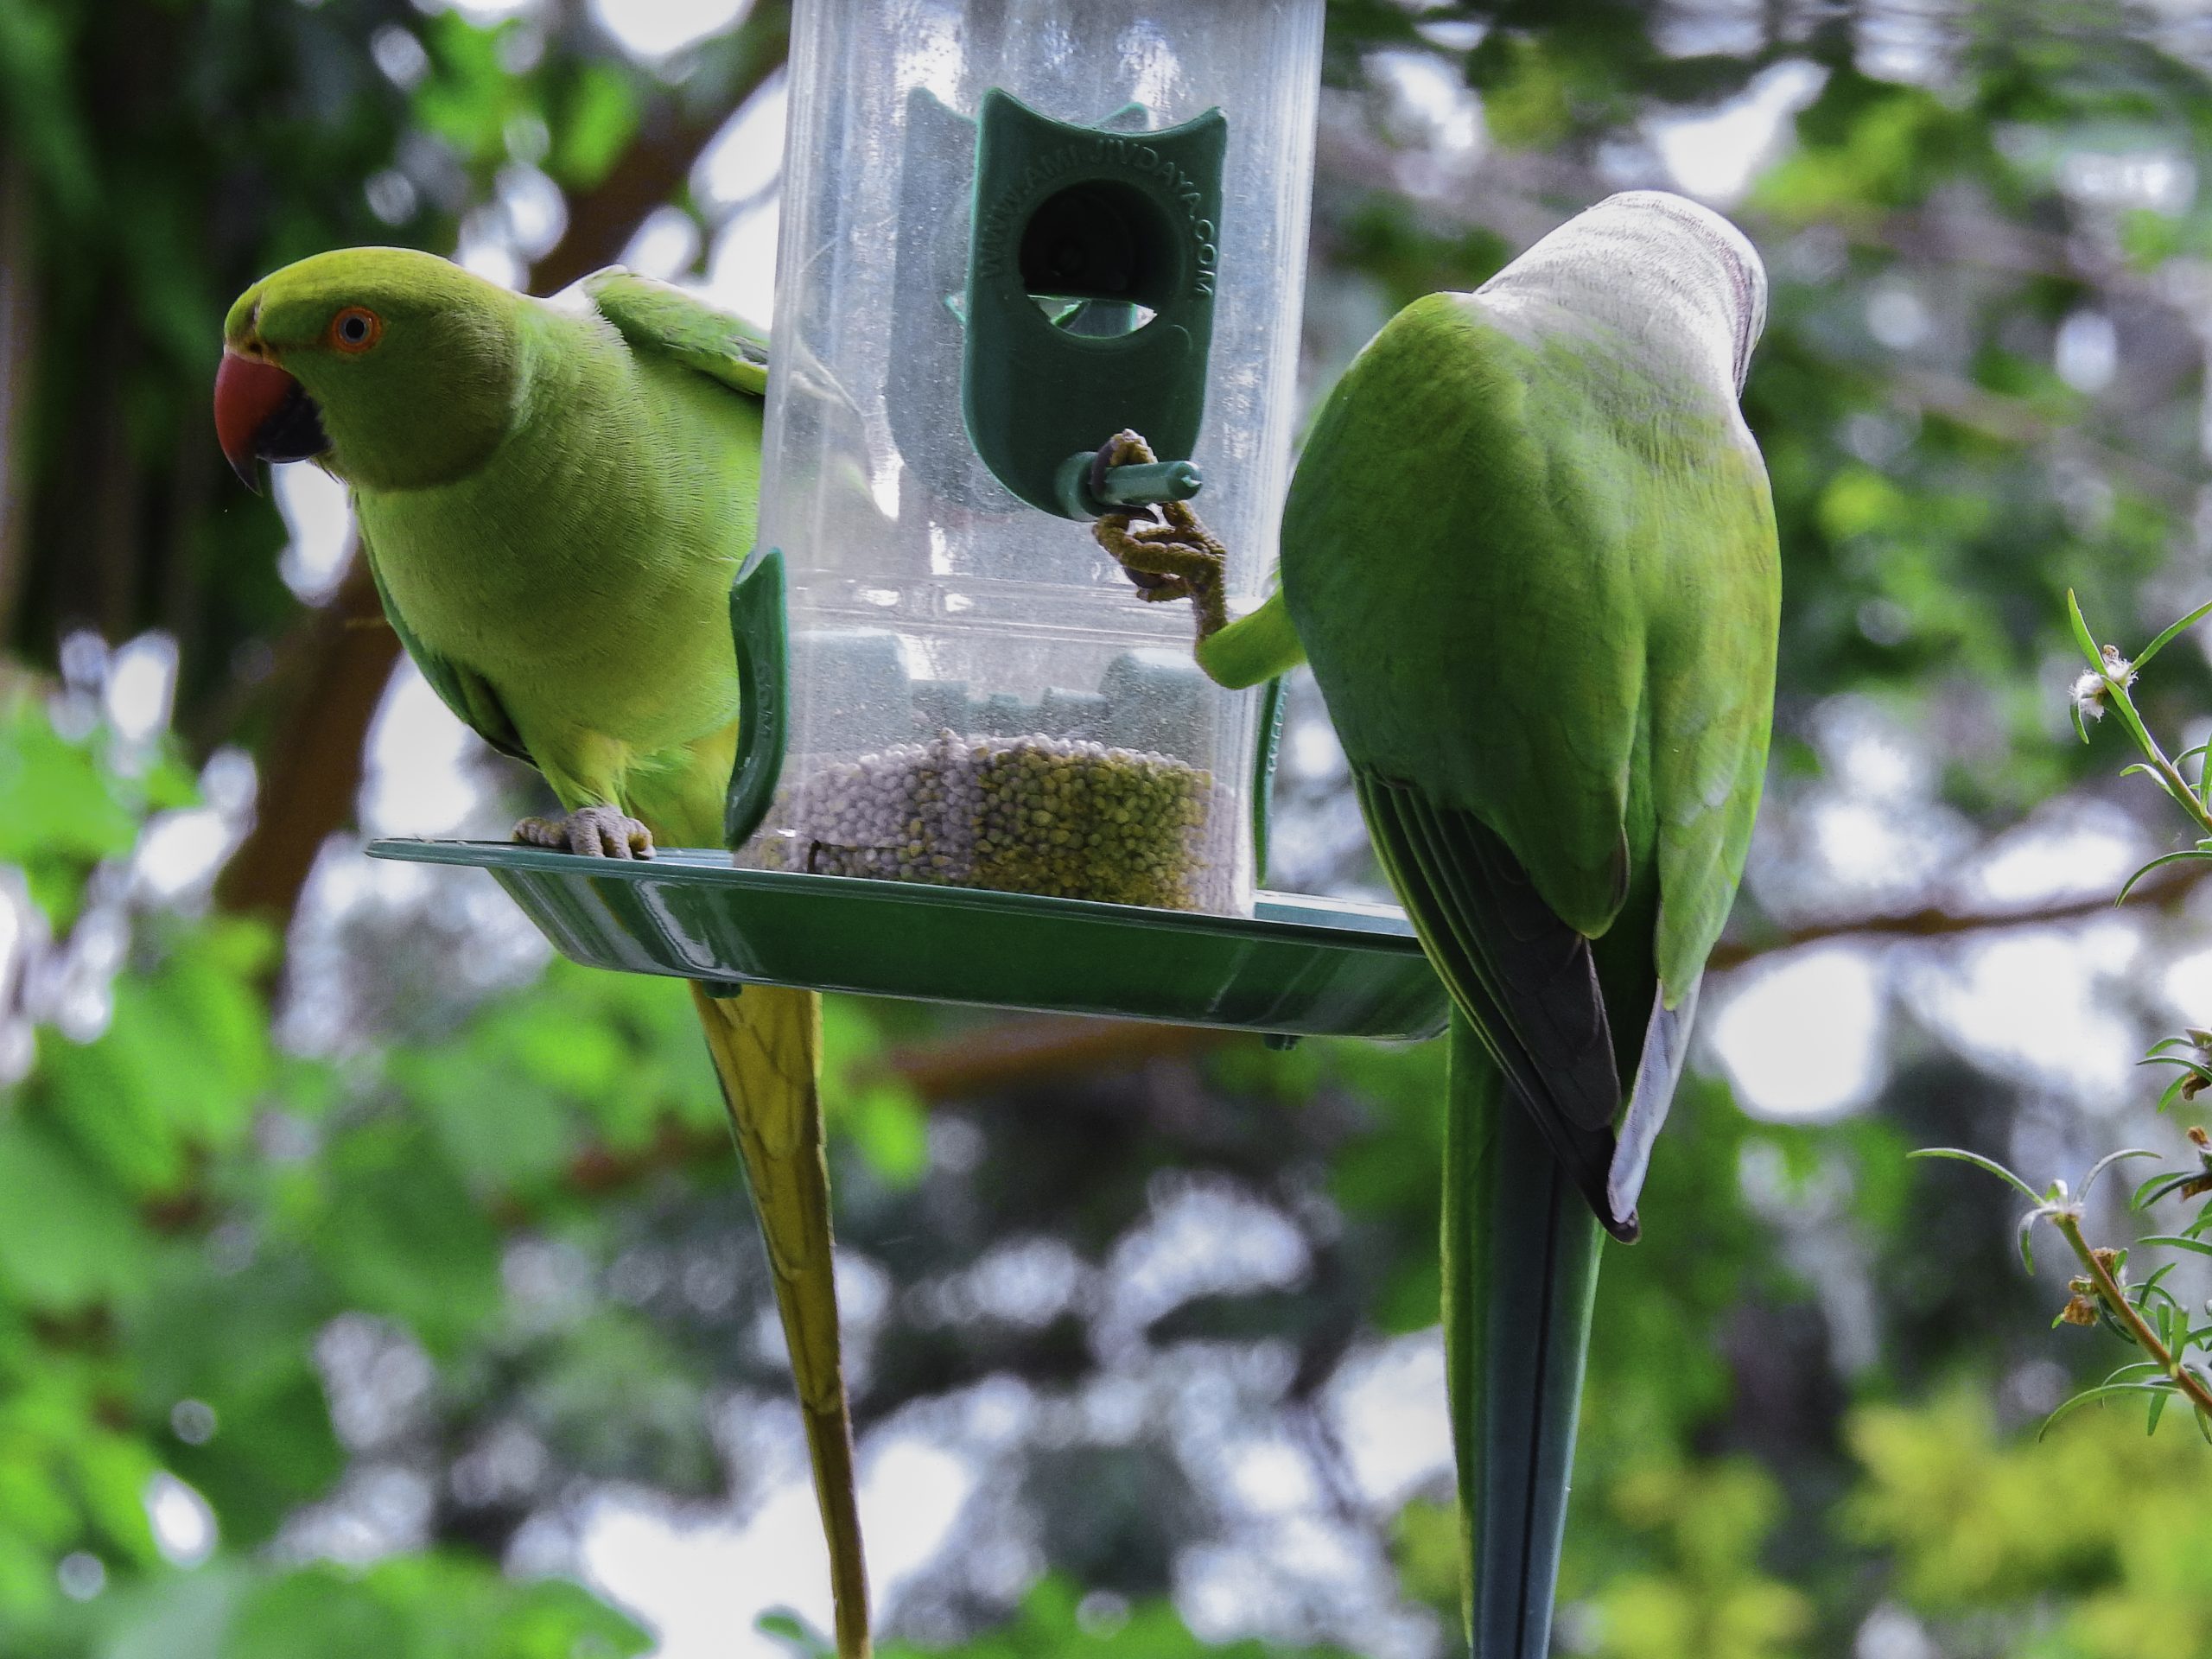 A pair of parrots on a feeder